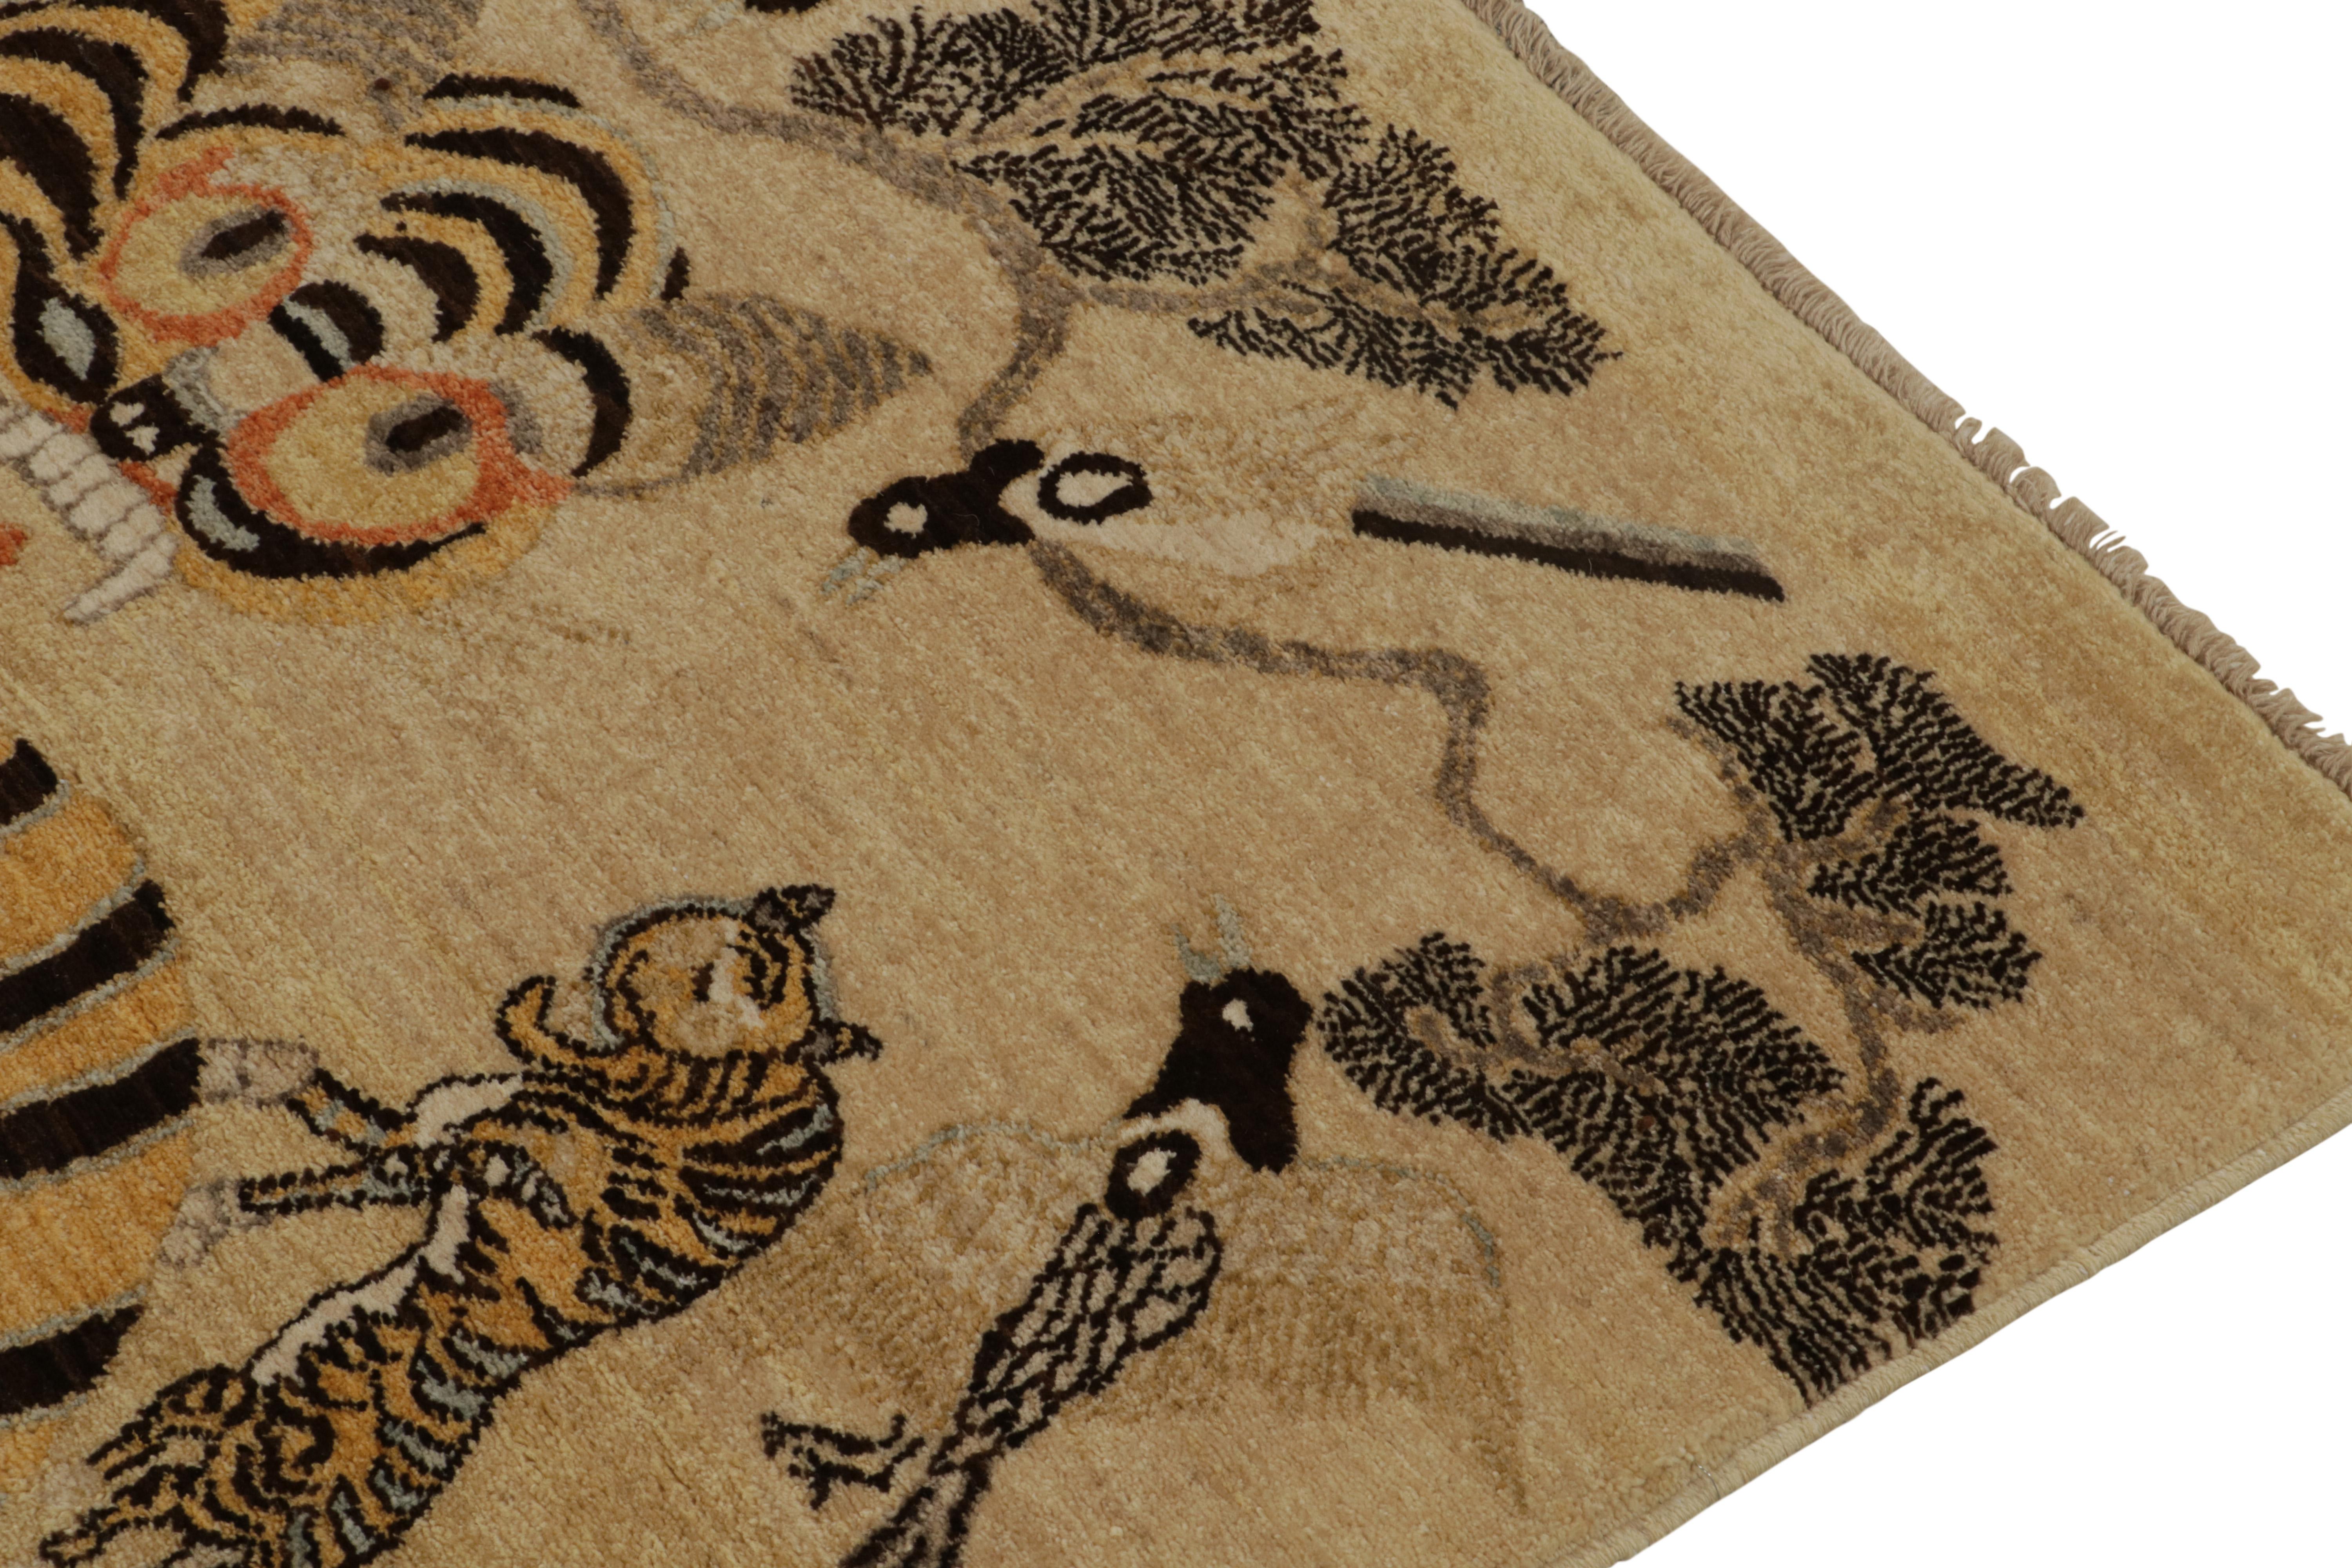 Rug & Kilim’s Pictorial Tiger Rug in Gold, Beige-Brown and Black In New Condition For Sale In Long Island City, NY